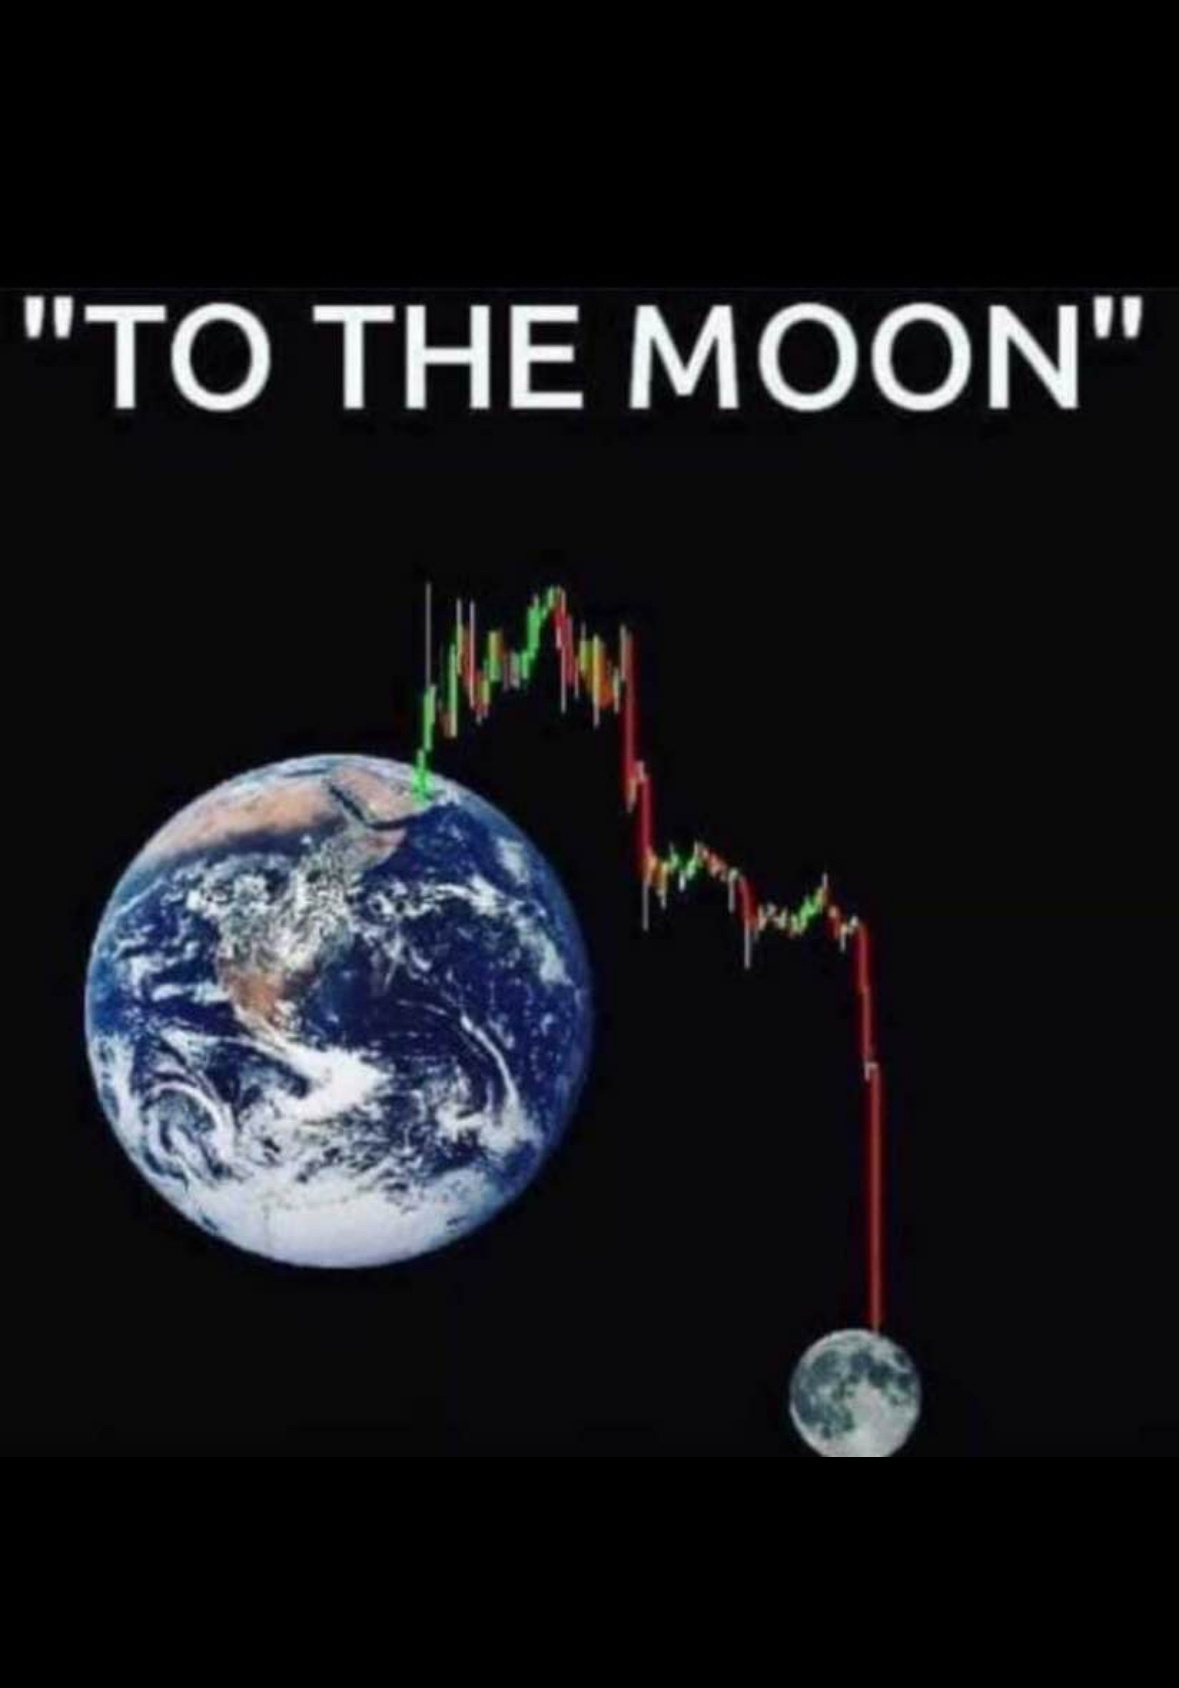 TO THE MOON 🤭